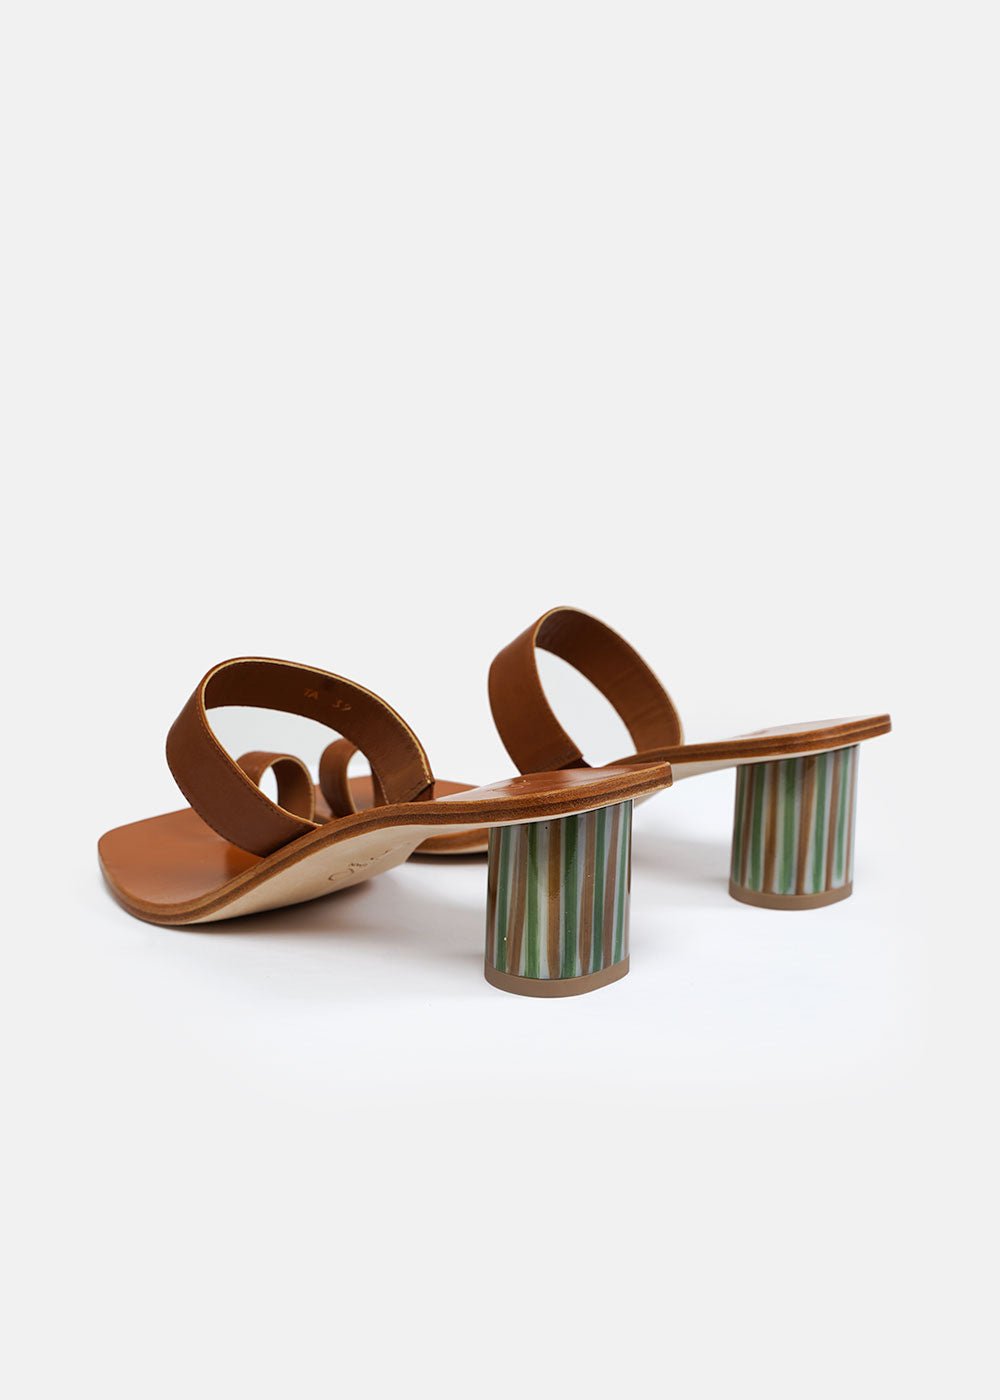 LoQ Flan Tere Sandals - New Classics Studios Sustainable Ethical Fashion Canada